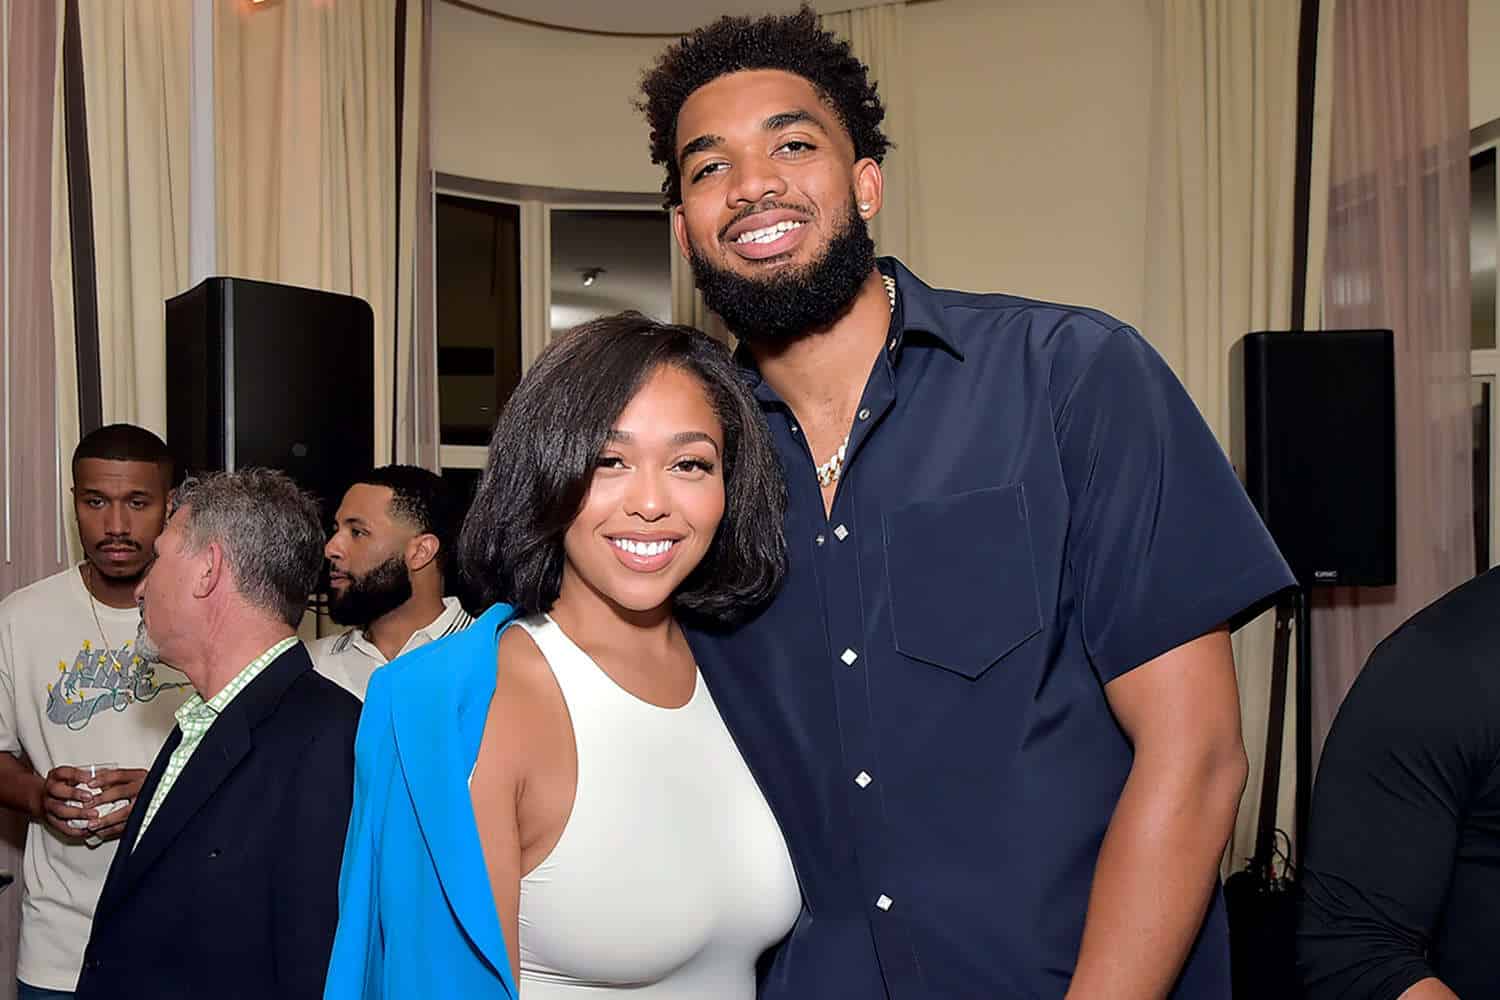 Jordyn Woods Celebrates Her 25th Birthday With A Backyard Bash +  Karl-Anthony Towns Gives Her An Iconic Gift!, News